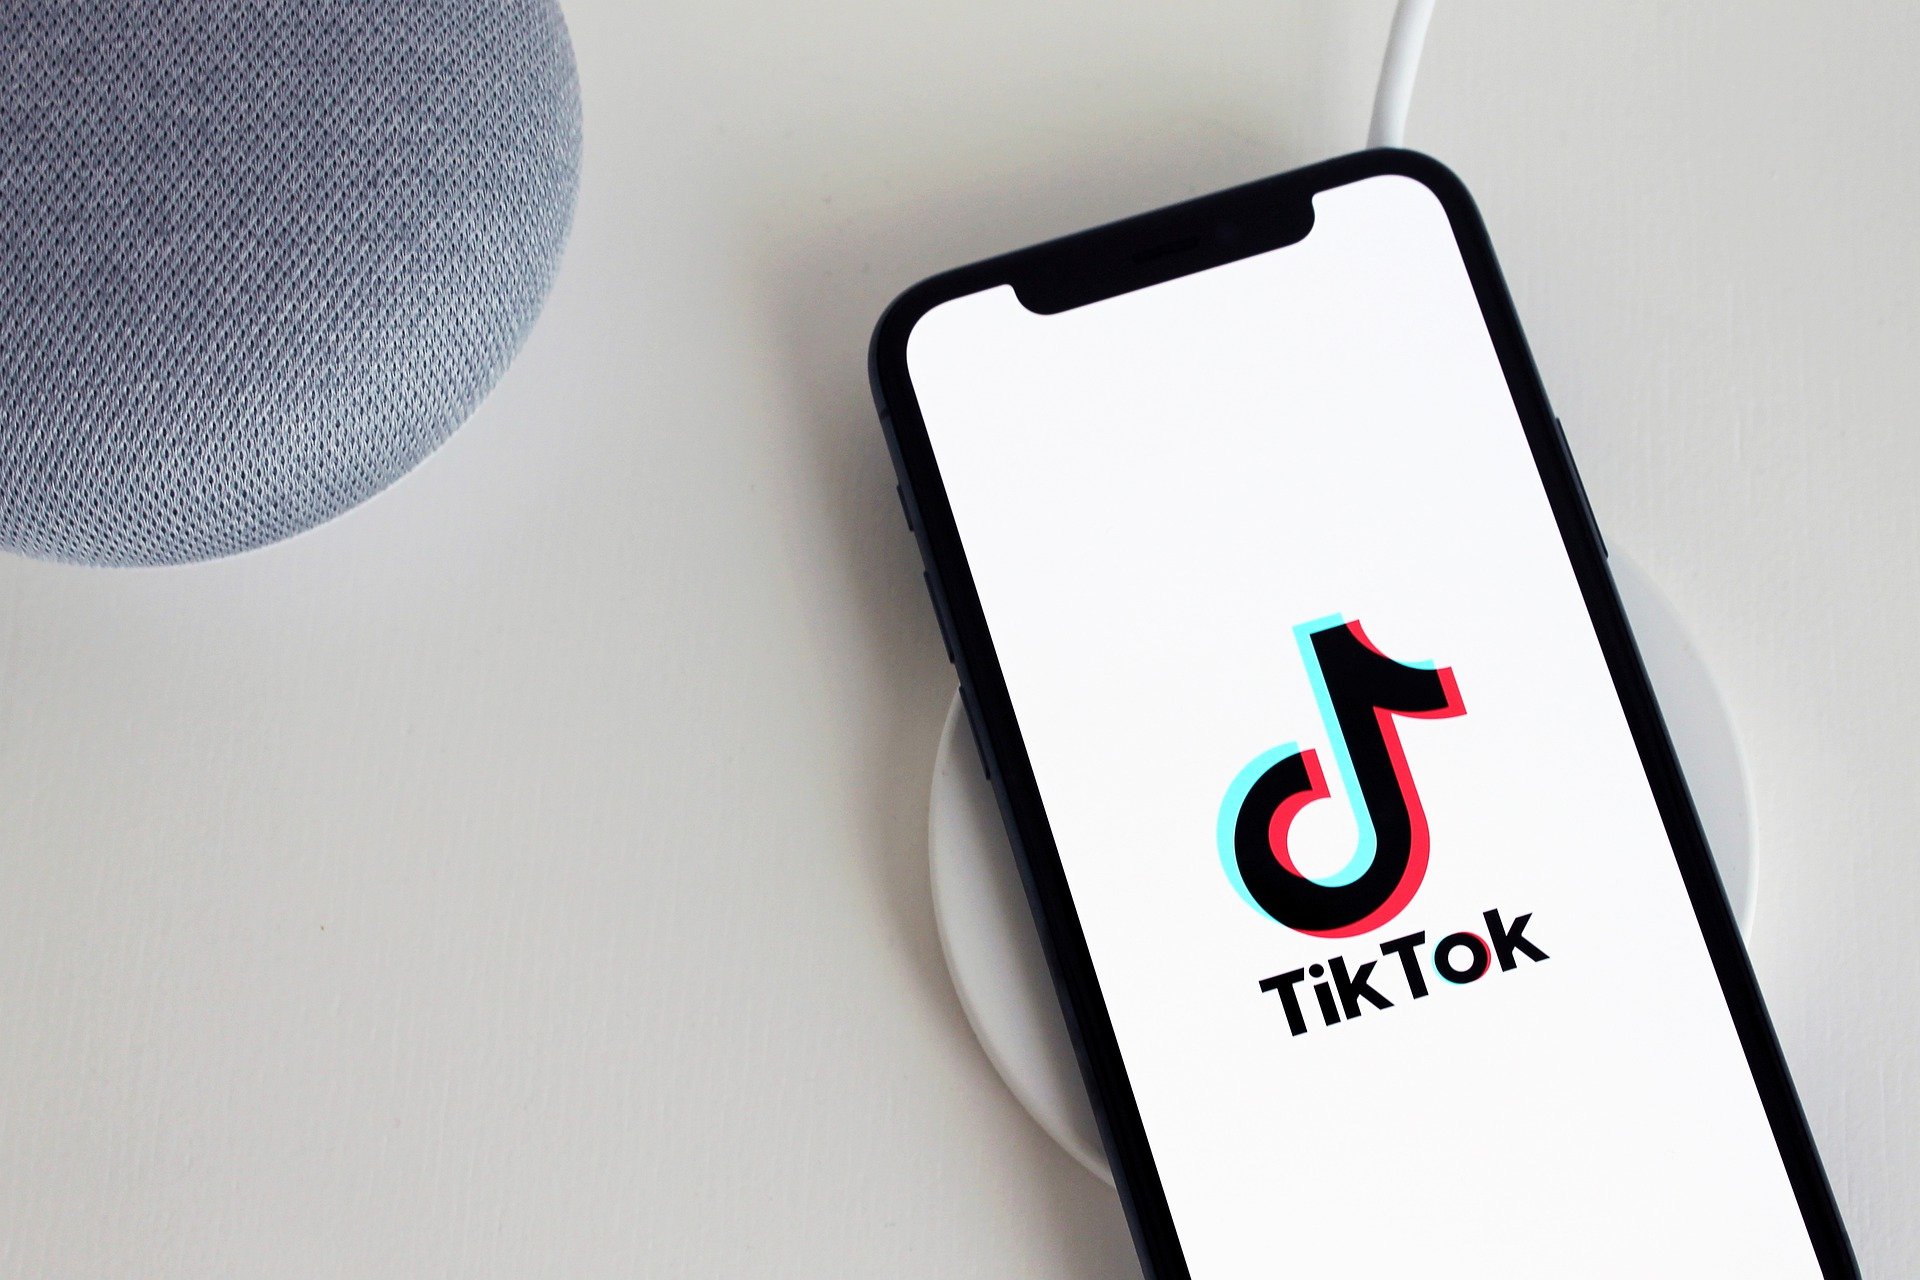 Pictured - A TikTok social media app on an Iphone | Source: Pixabay